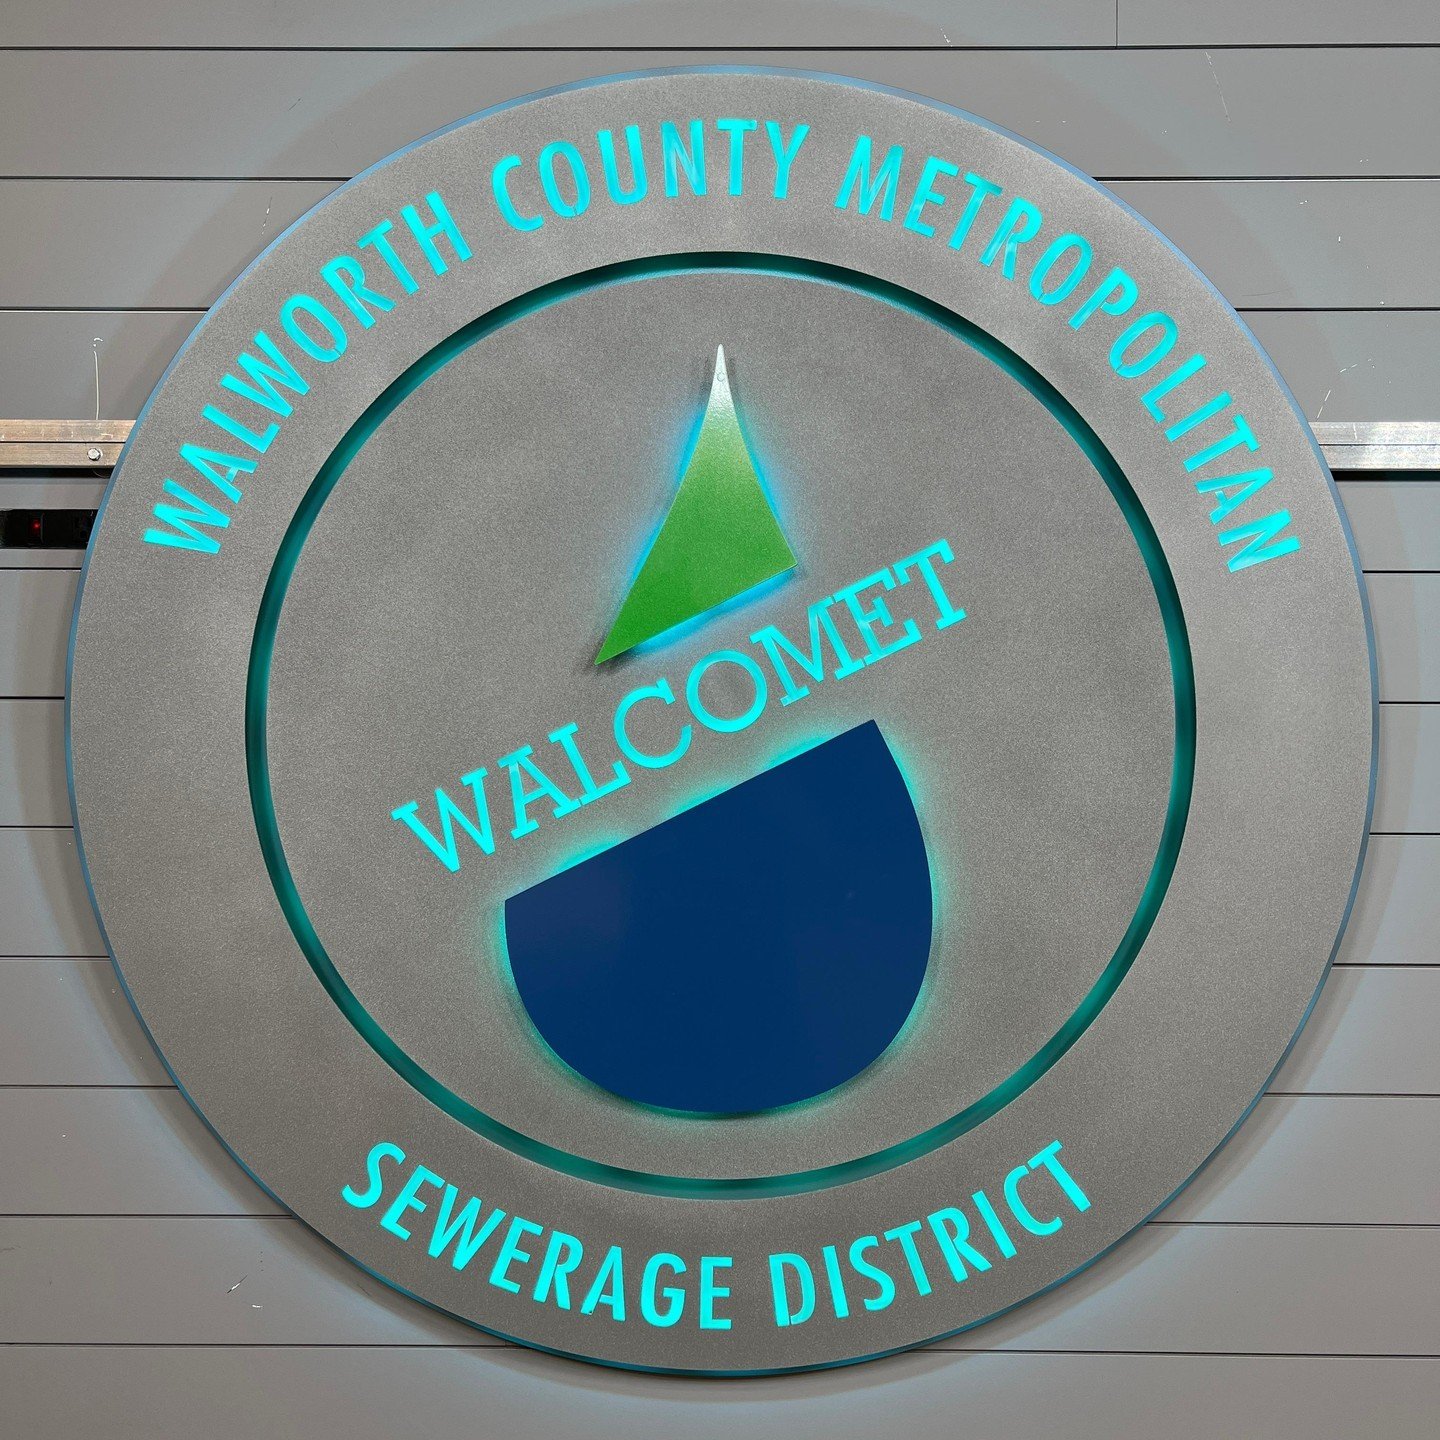 We're proud to have crafted a new sign for WalCoMet, a vital organization serving the Elkhorn area and the Delavan Lake Sanitary District since 1974. This substantial sign, with its sleek design, reflects WalCoMet's commitment to providing clean wate